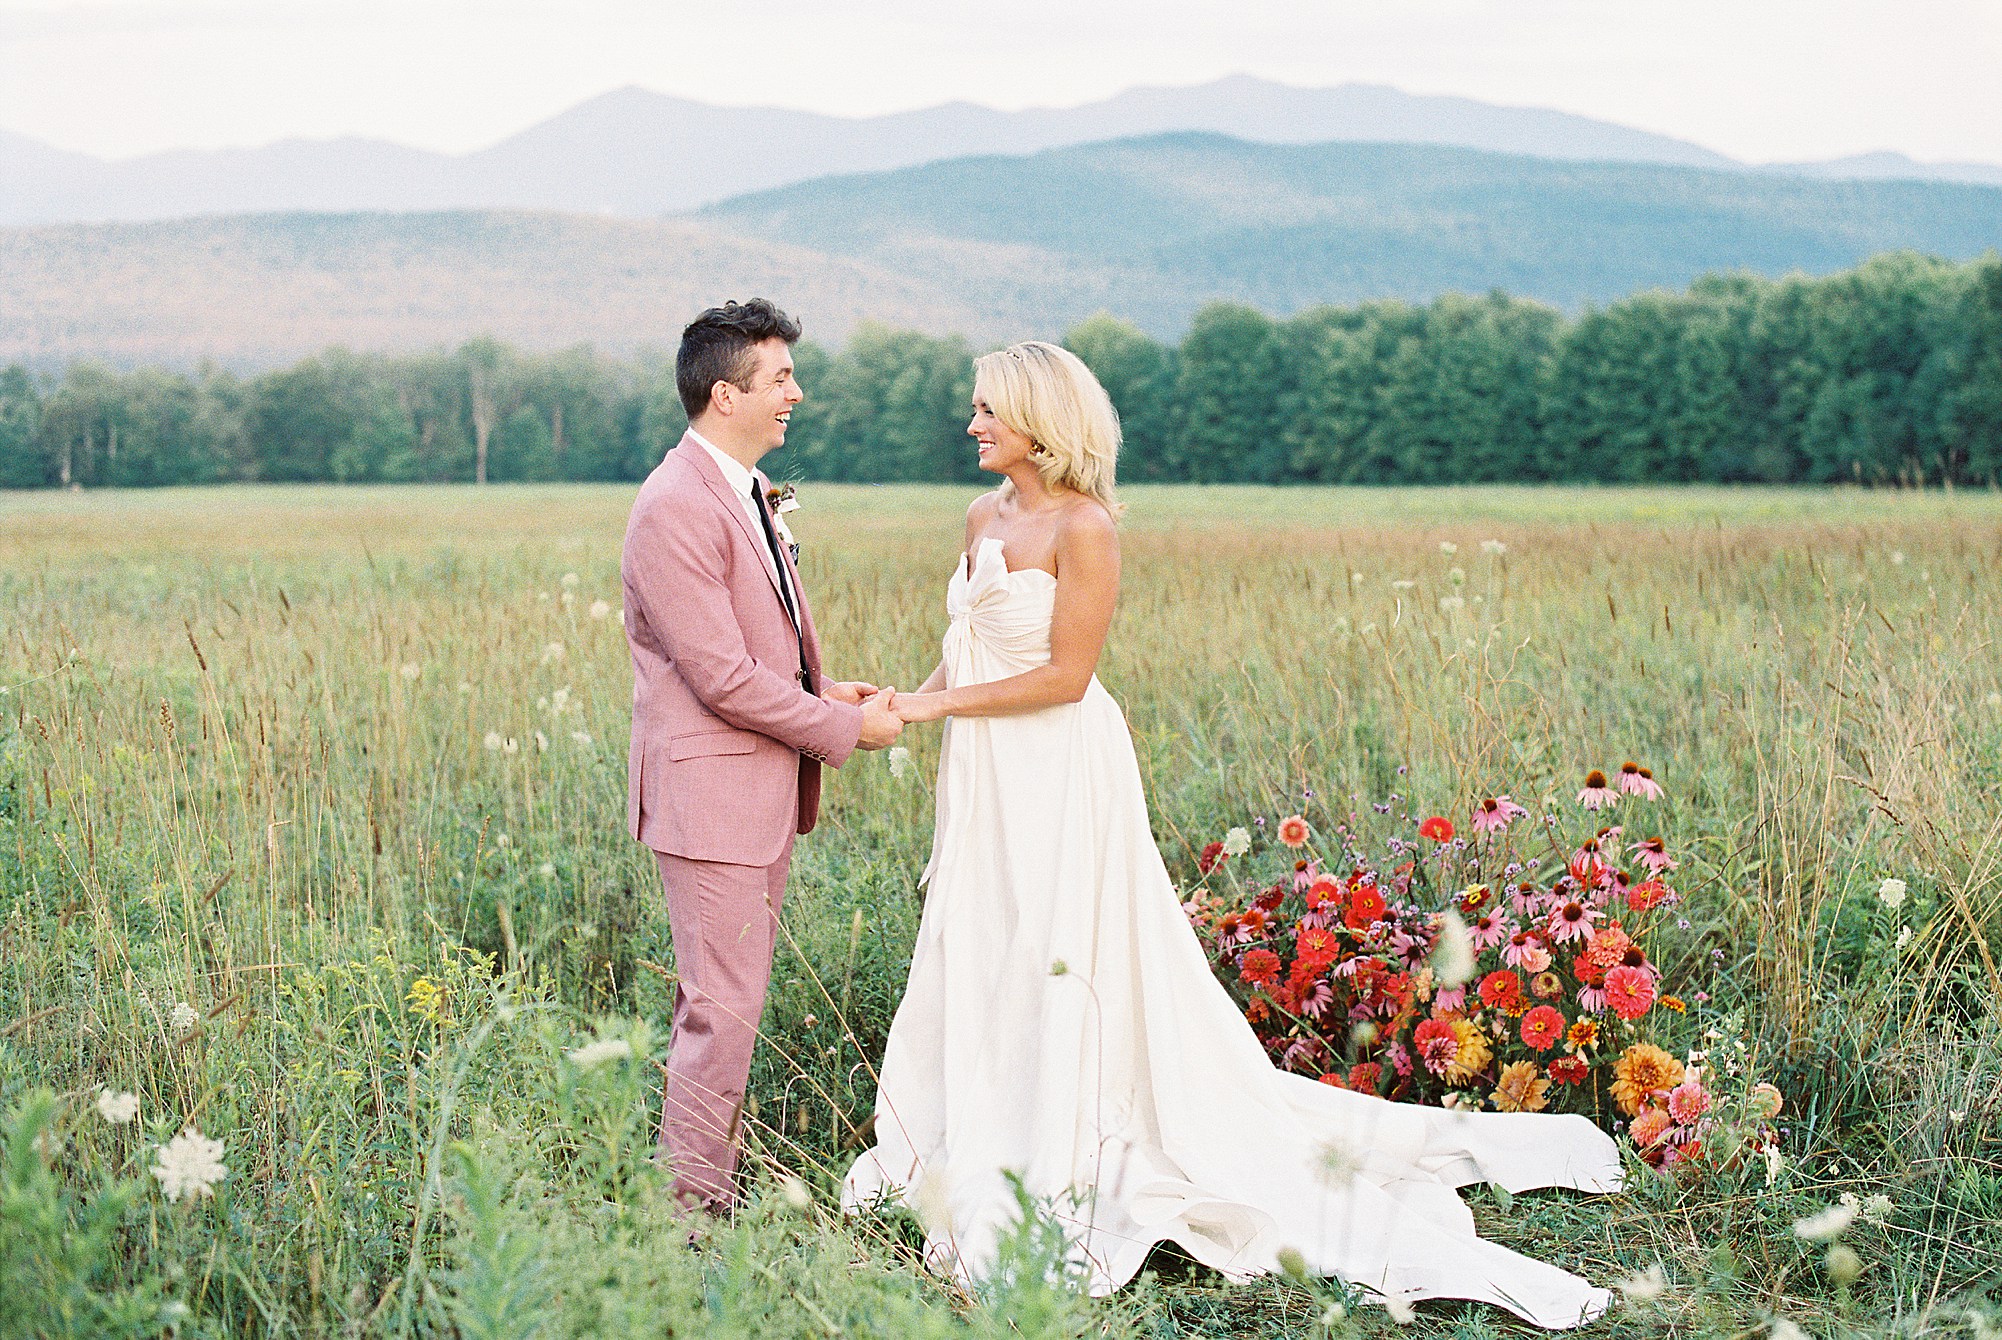 outdoor ceremony in field surrounded by the Adirondack Mountains